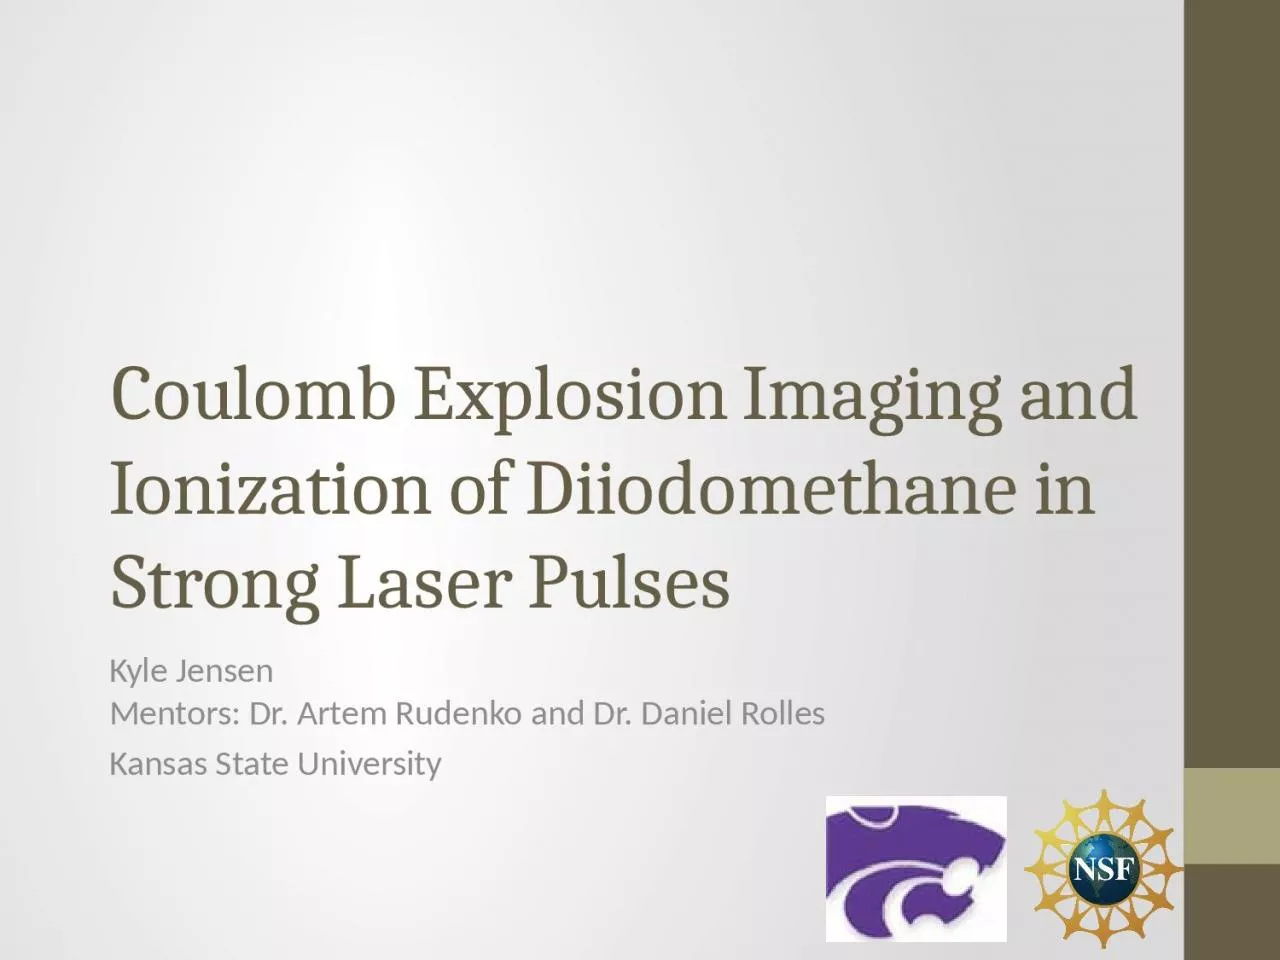 Coulomb Explosion Imaging and Ionization of